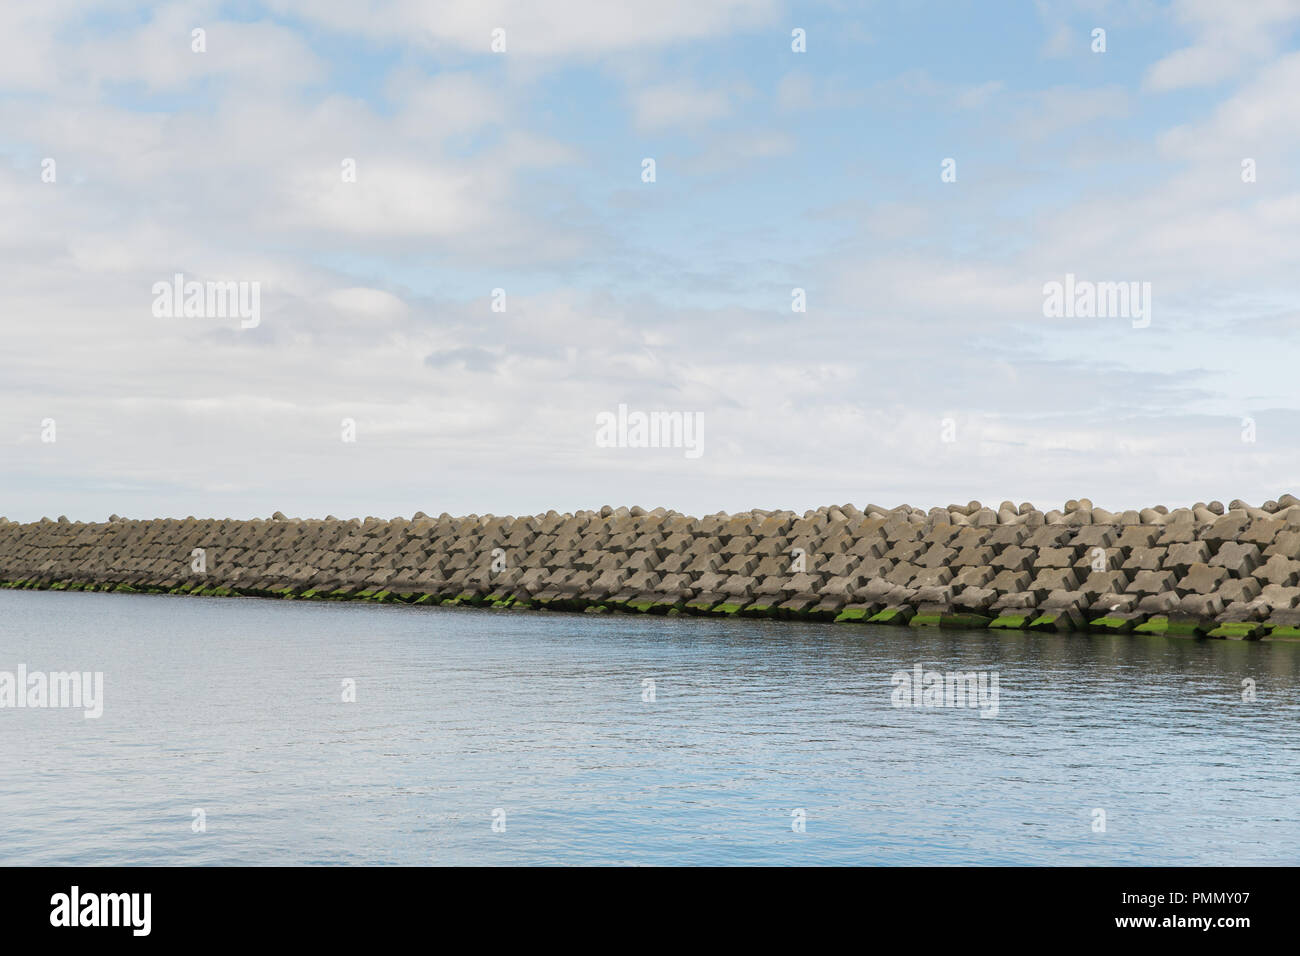 Manmade sea wall / defence / barrier built with blocks of cross-shaped concrete Stock Photo